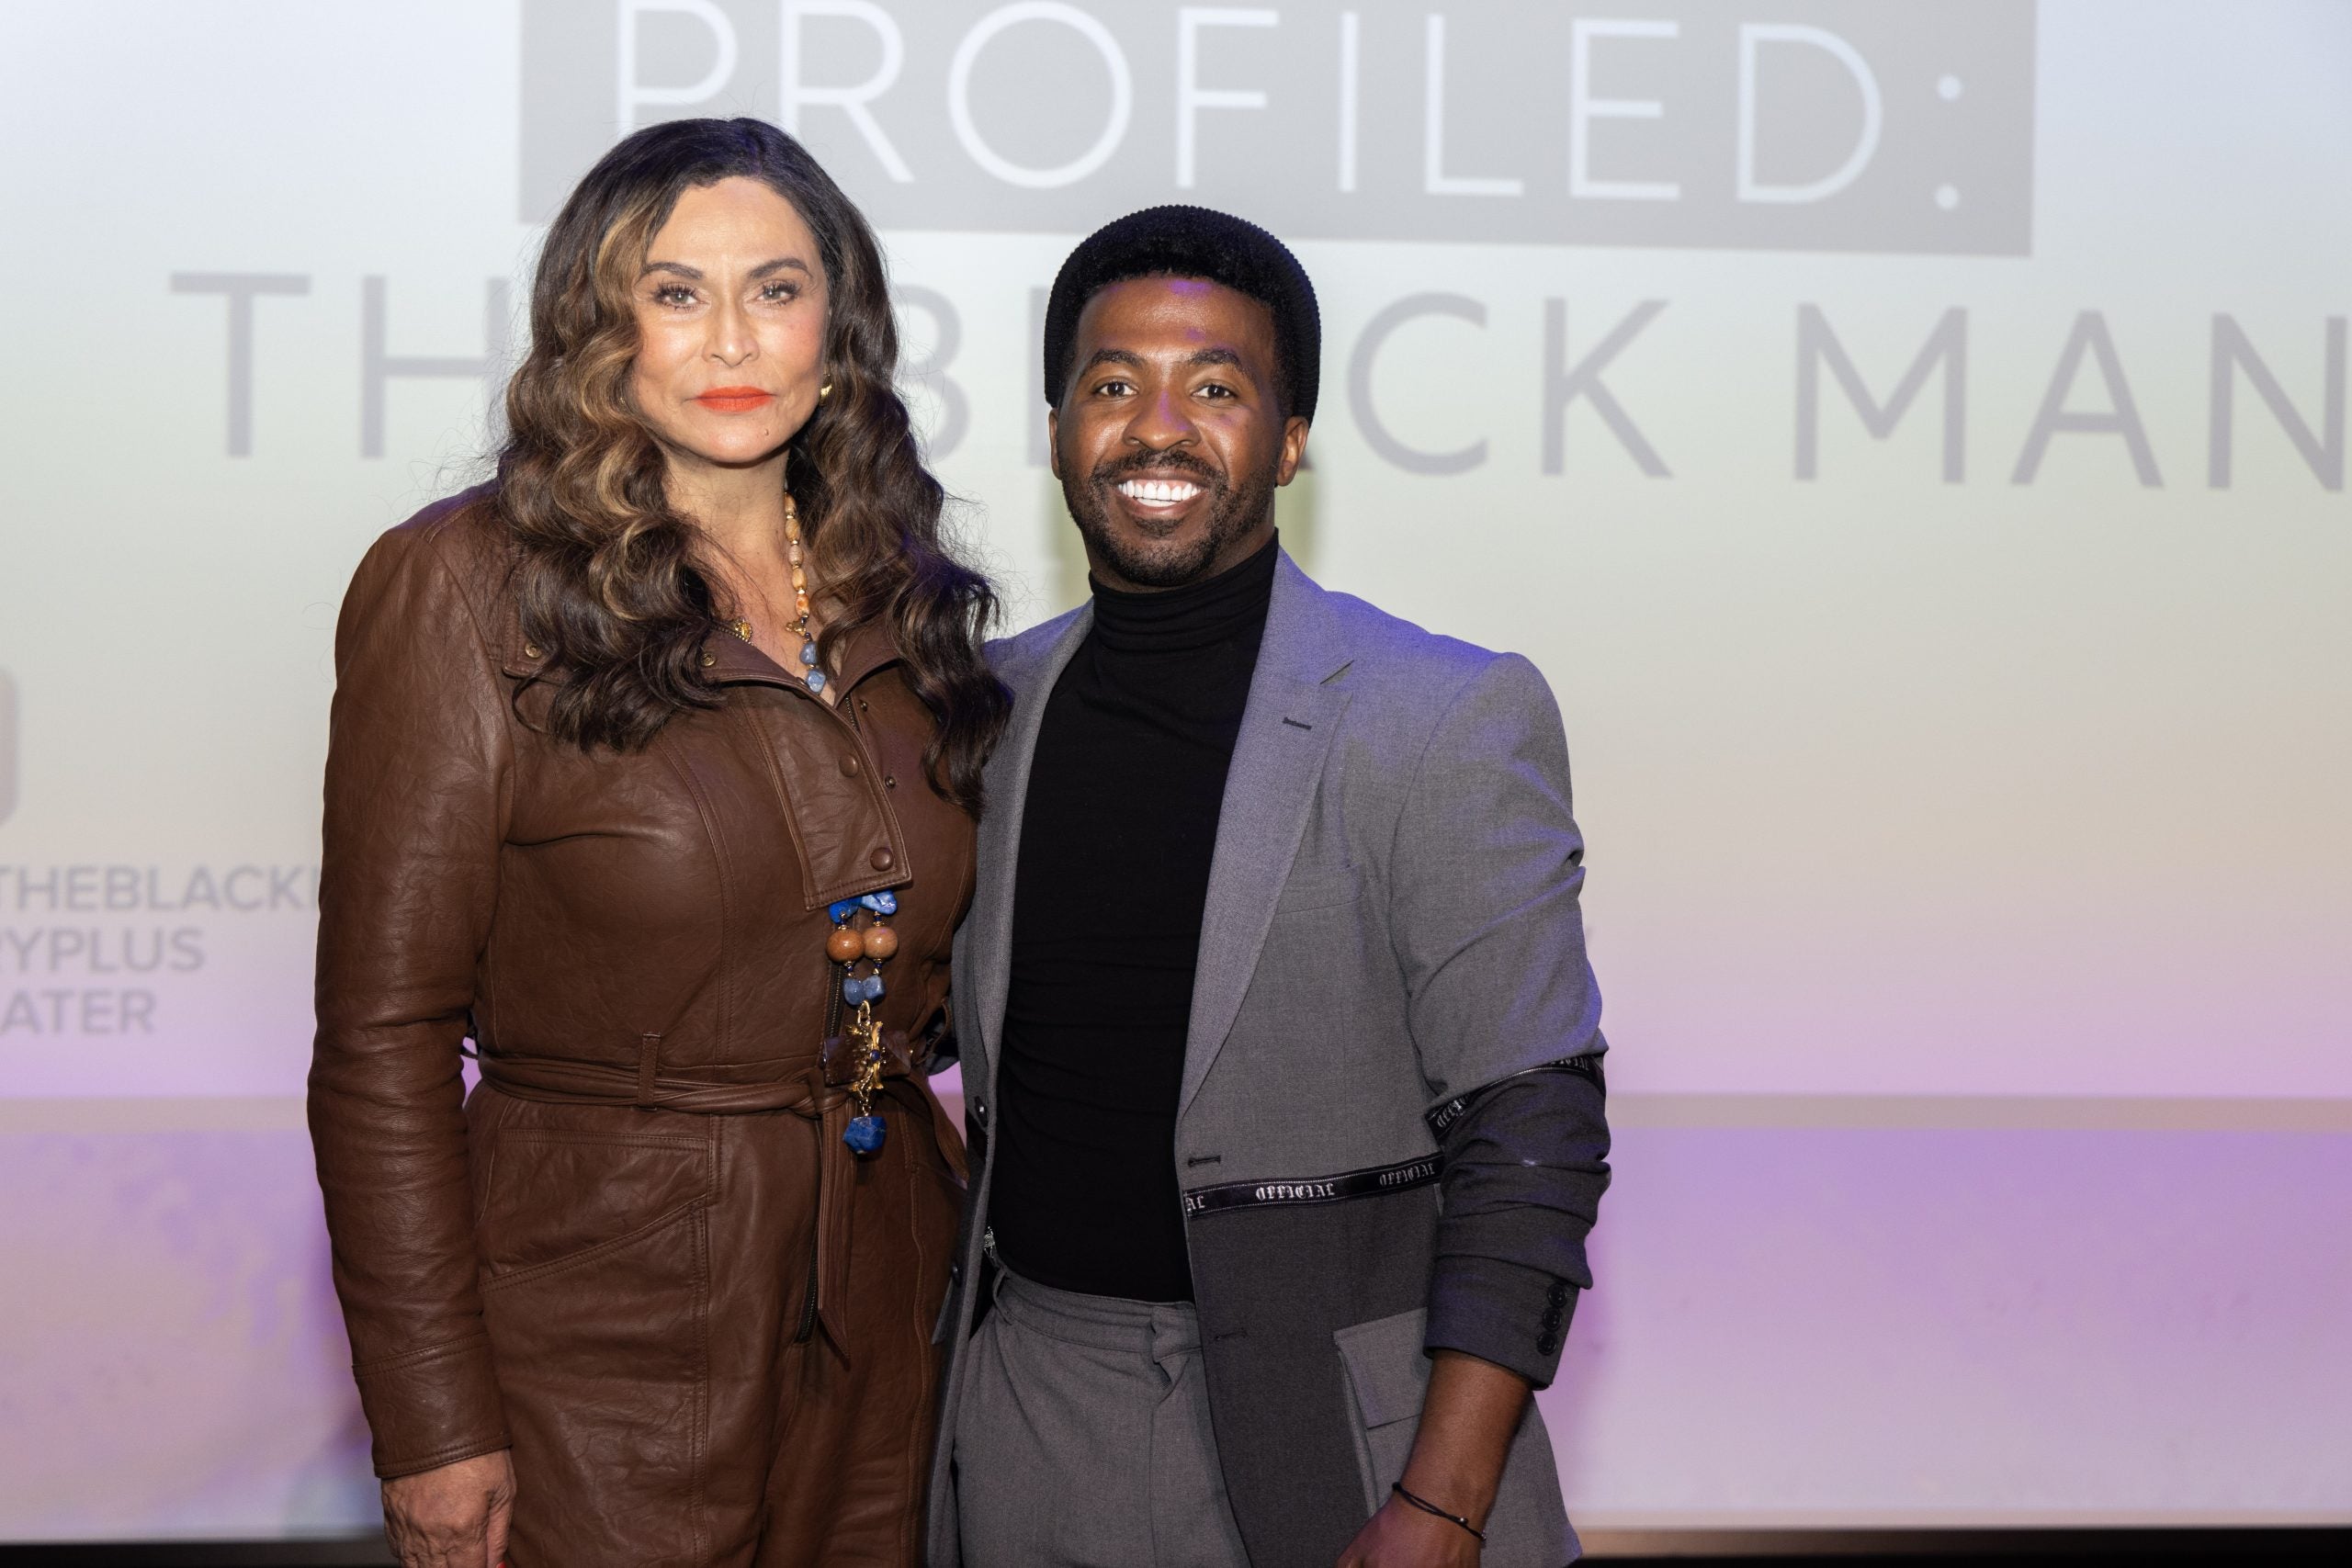 Tina Knowles Lawson Speaks At Screening Of 'Profiled: The Black Man' In LA